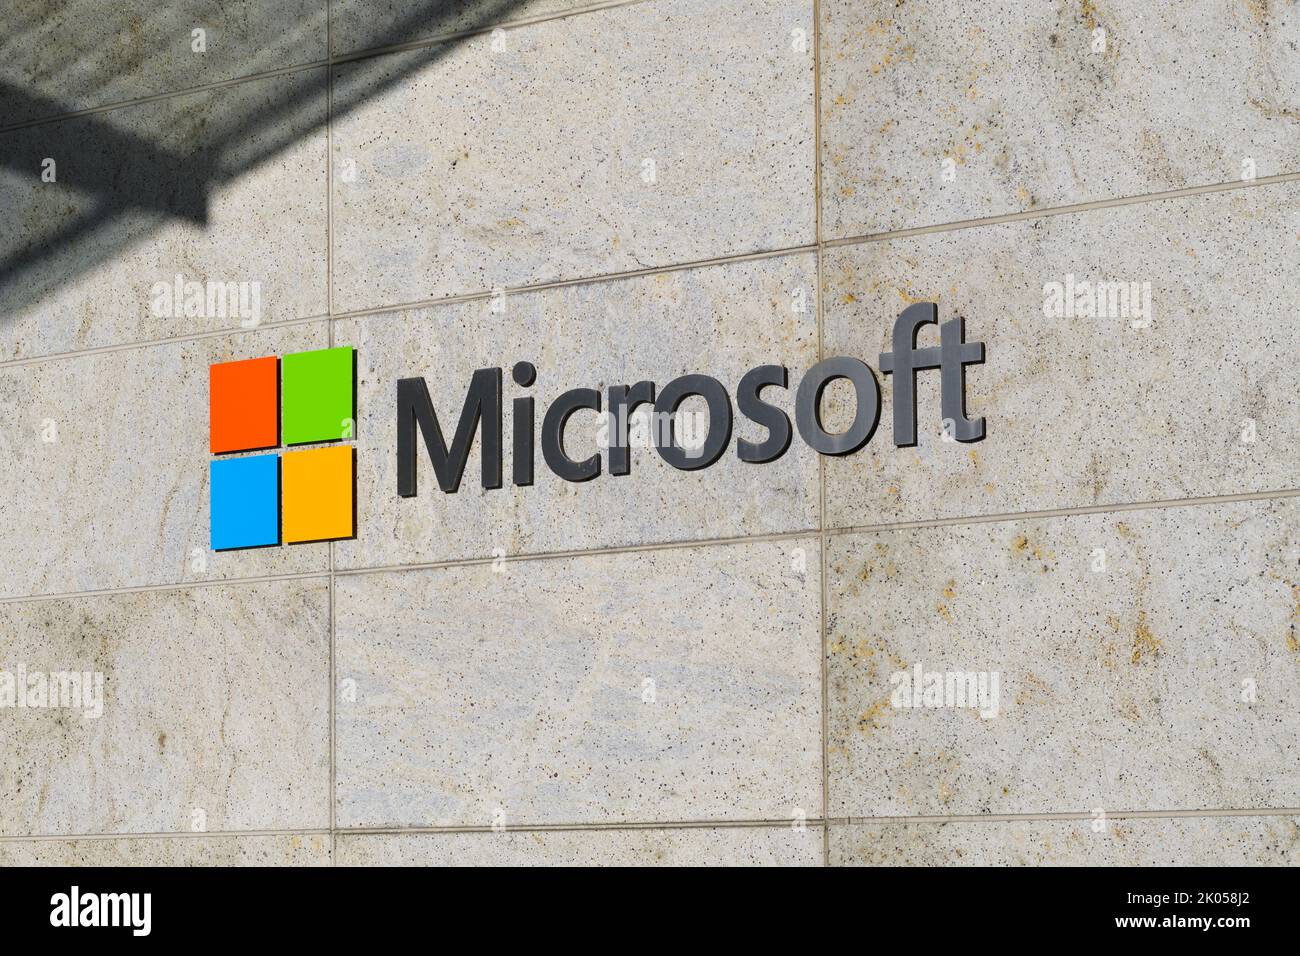 Bellevue, WA, USA - September 08, 2022; Sign for Microsoft Corporation with logo on stone tile wall with shadow Stock Photo